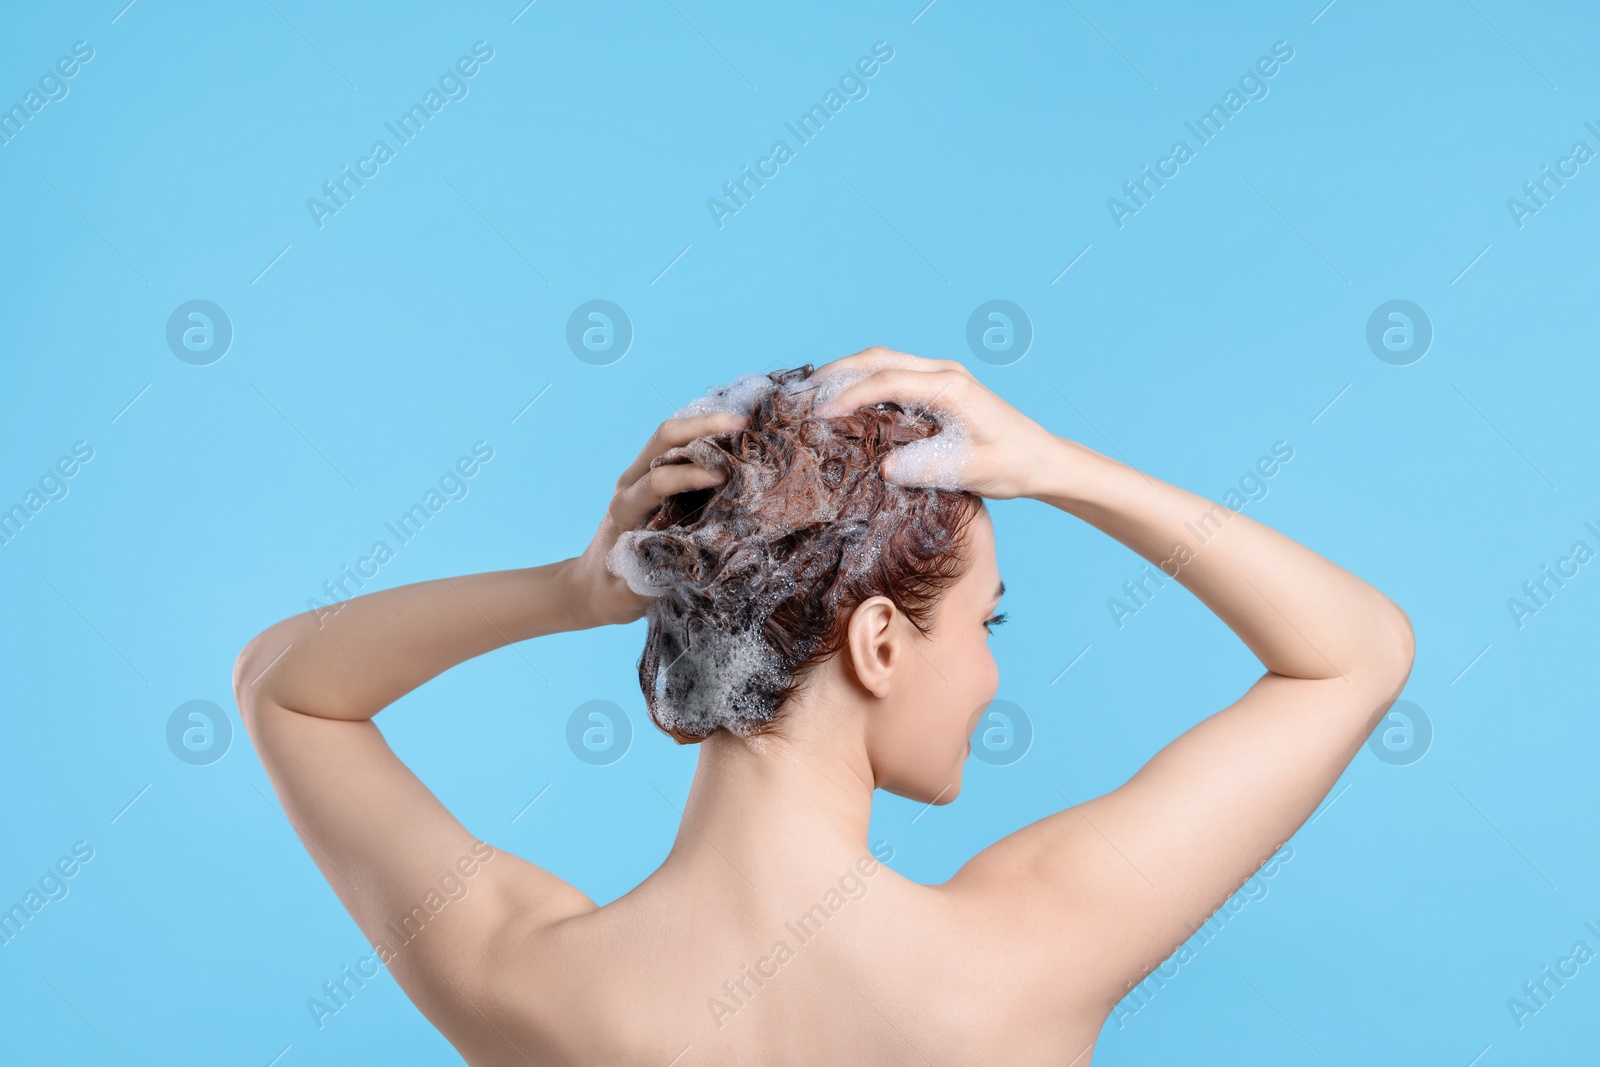 Photo of Young woman washing her hair with shampoo on light blue background, back view